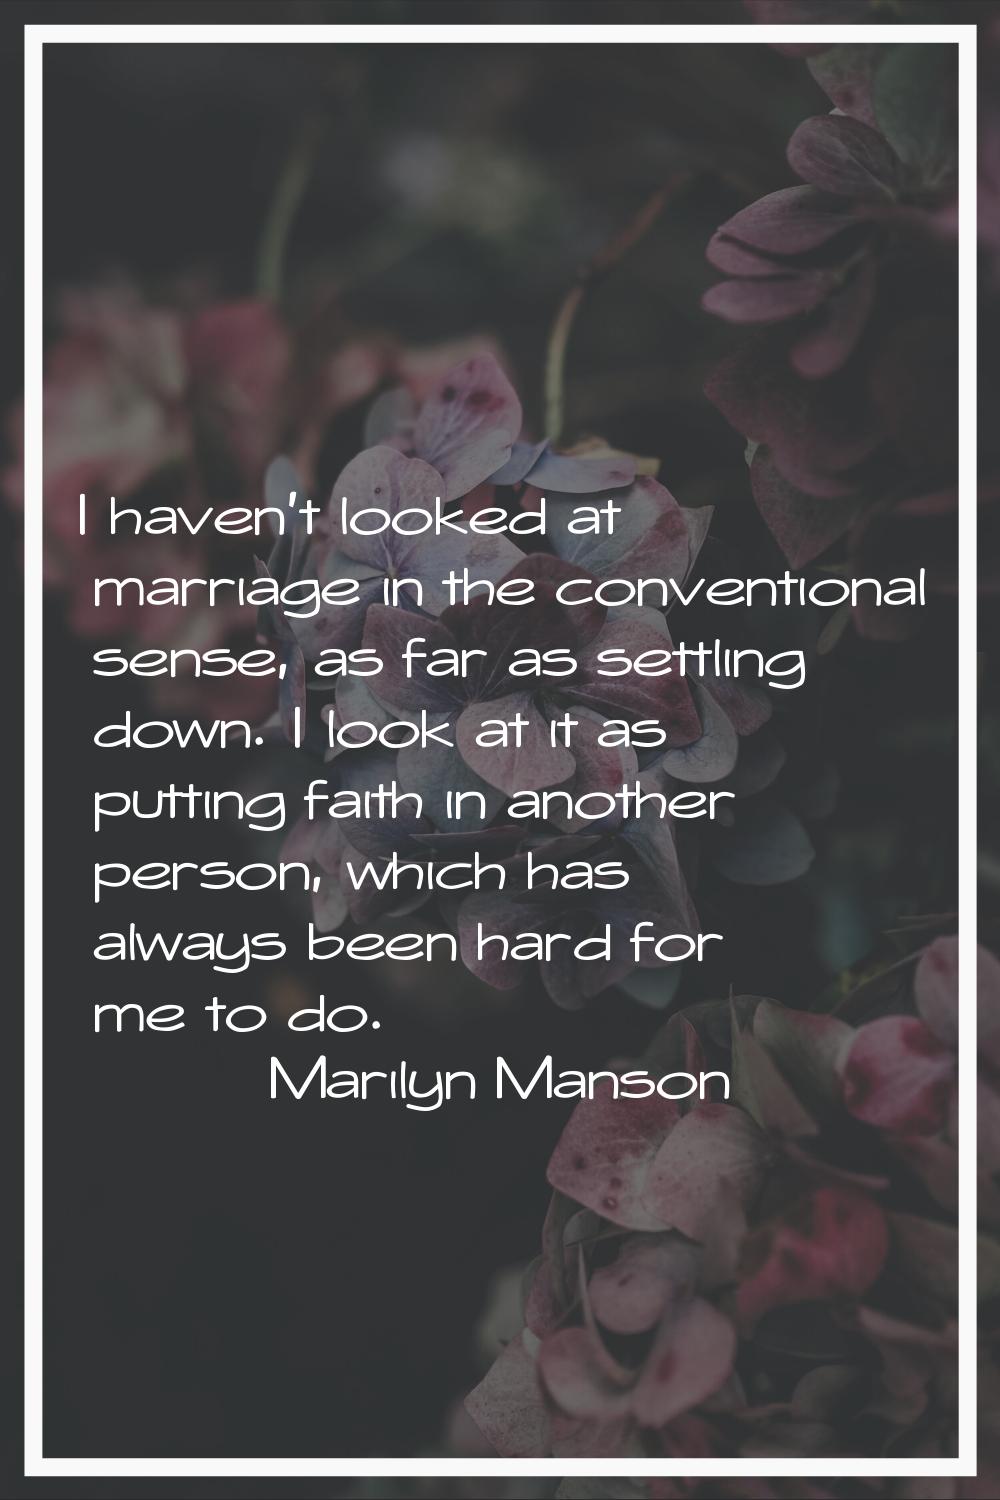 I haven't looked at marriage in the conventional sense, as far as settling down. I look at it as pu